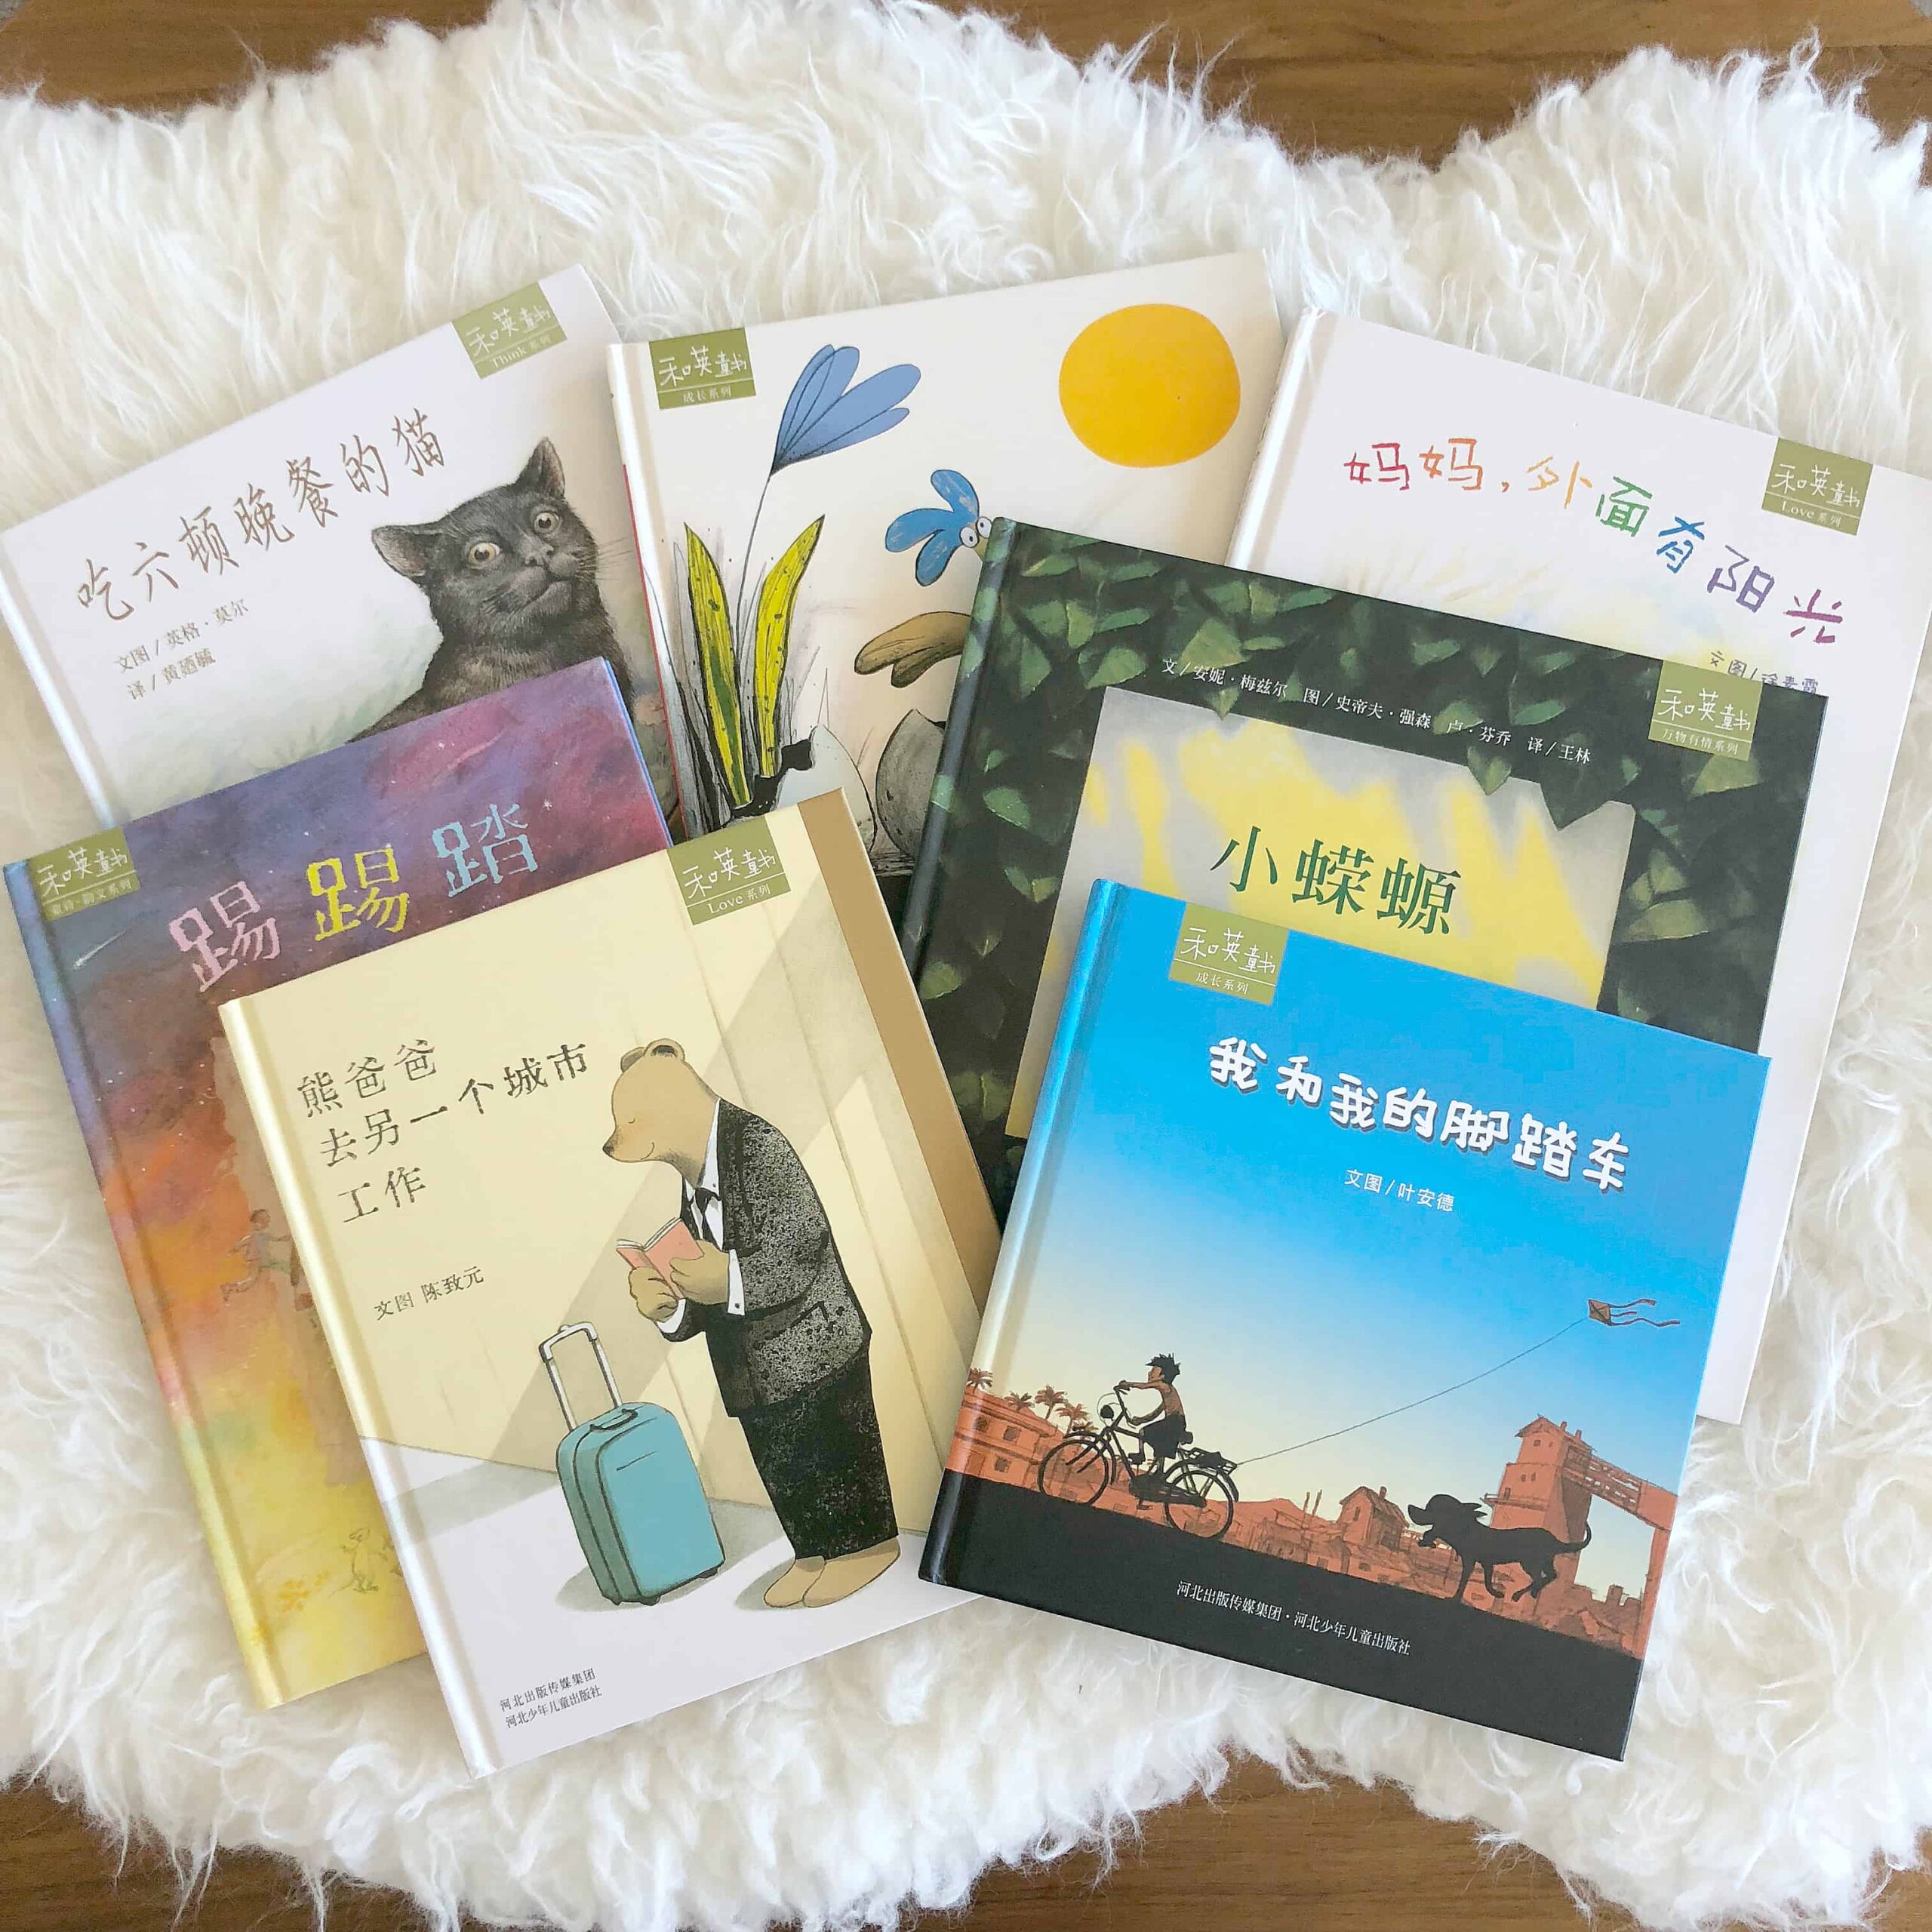 Chinese Picture Books with Audio CDs by Heryin Publishing (VIDEO)